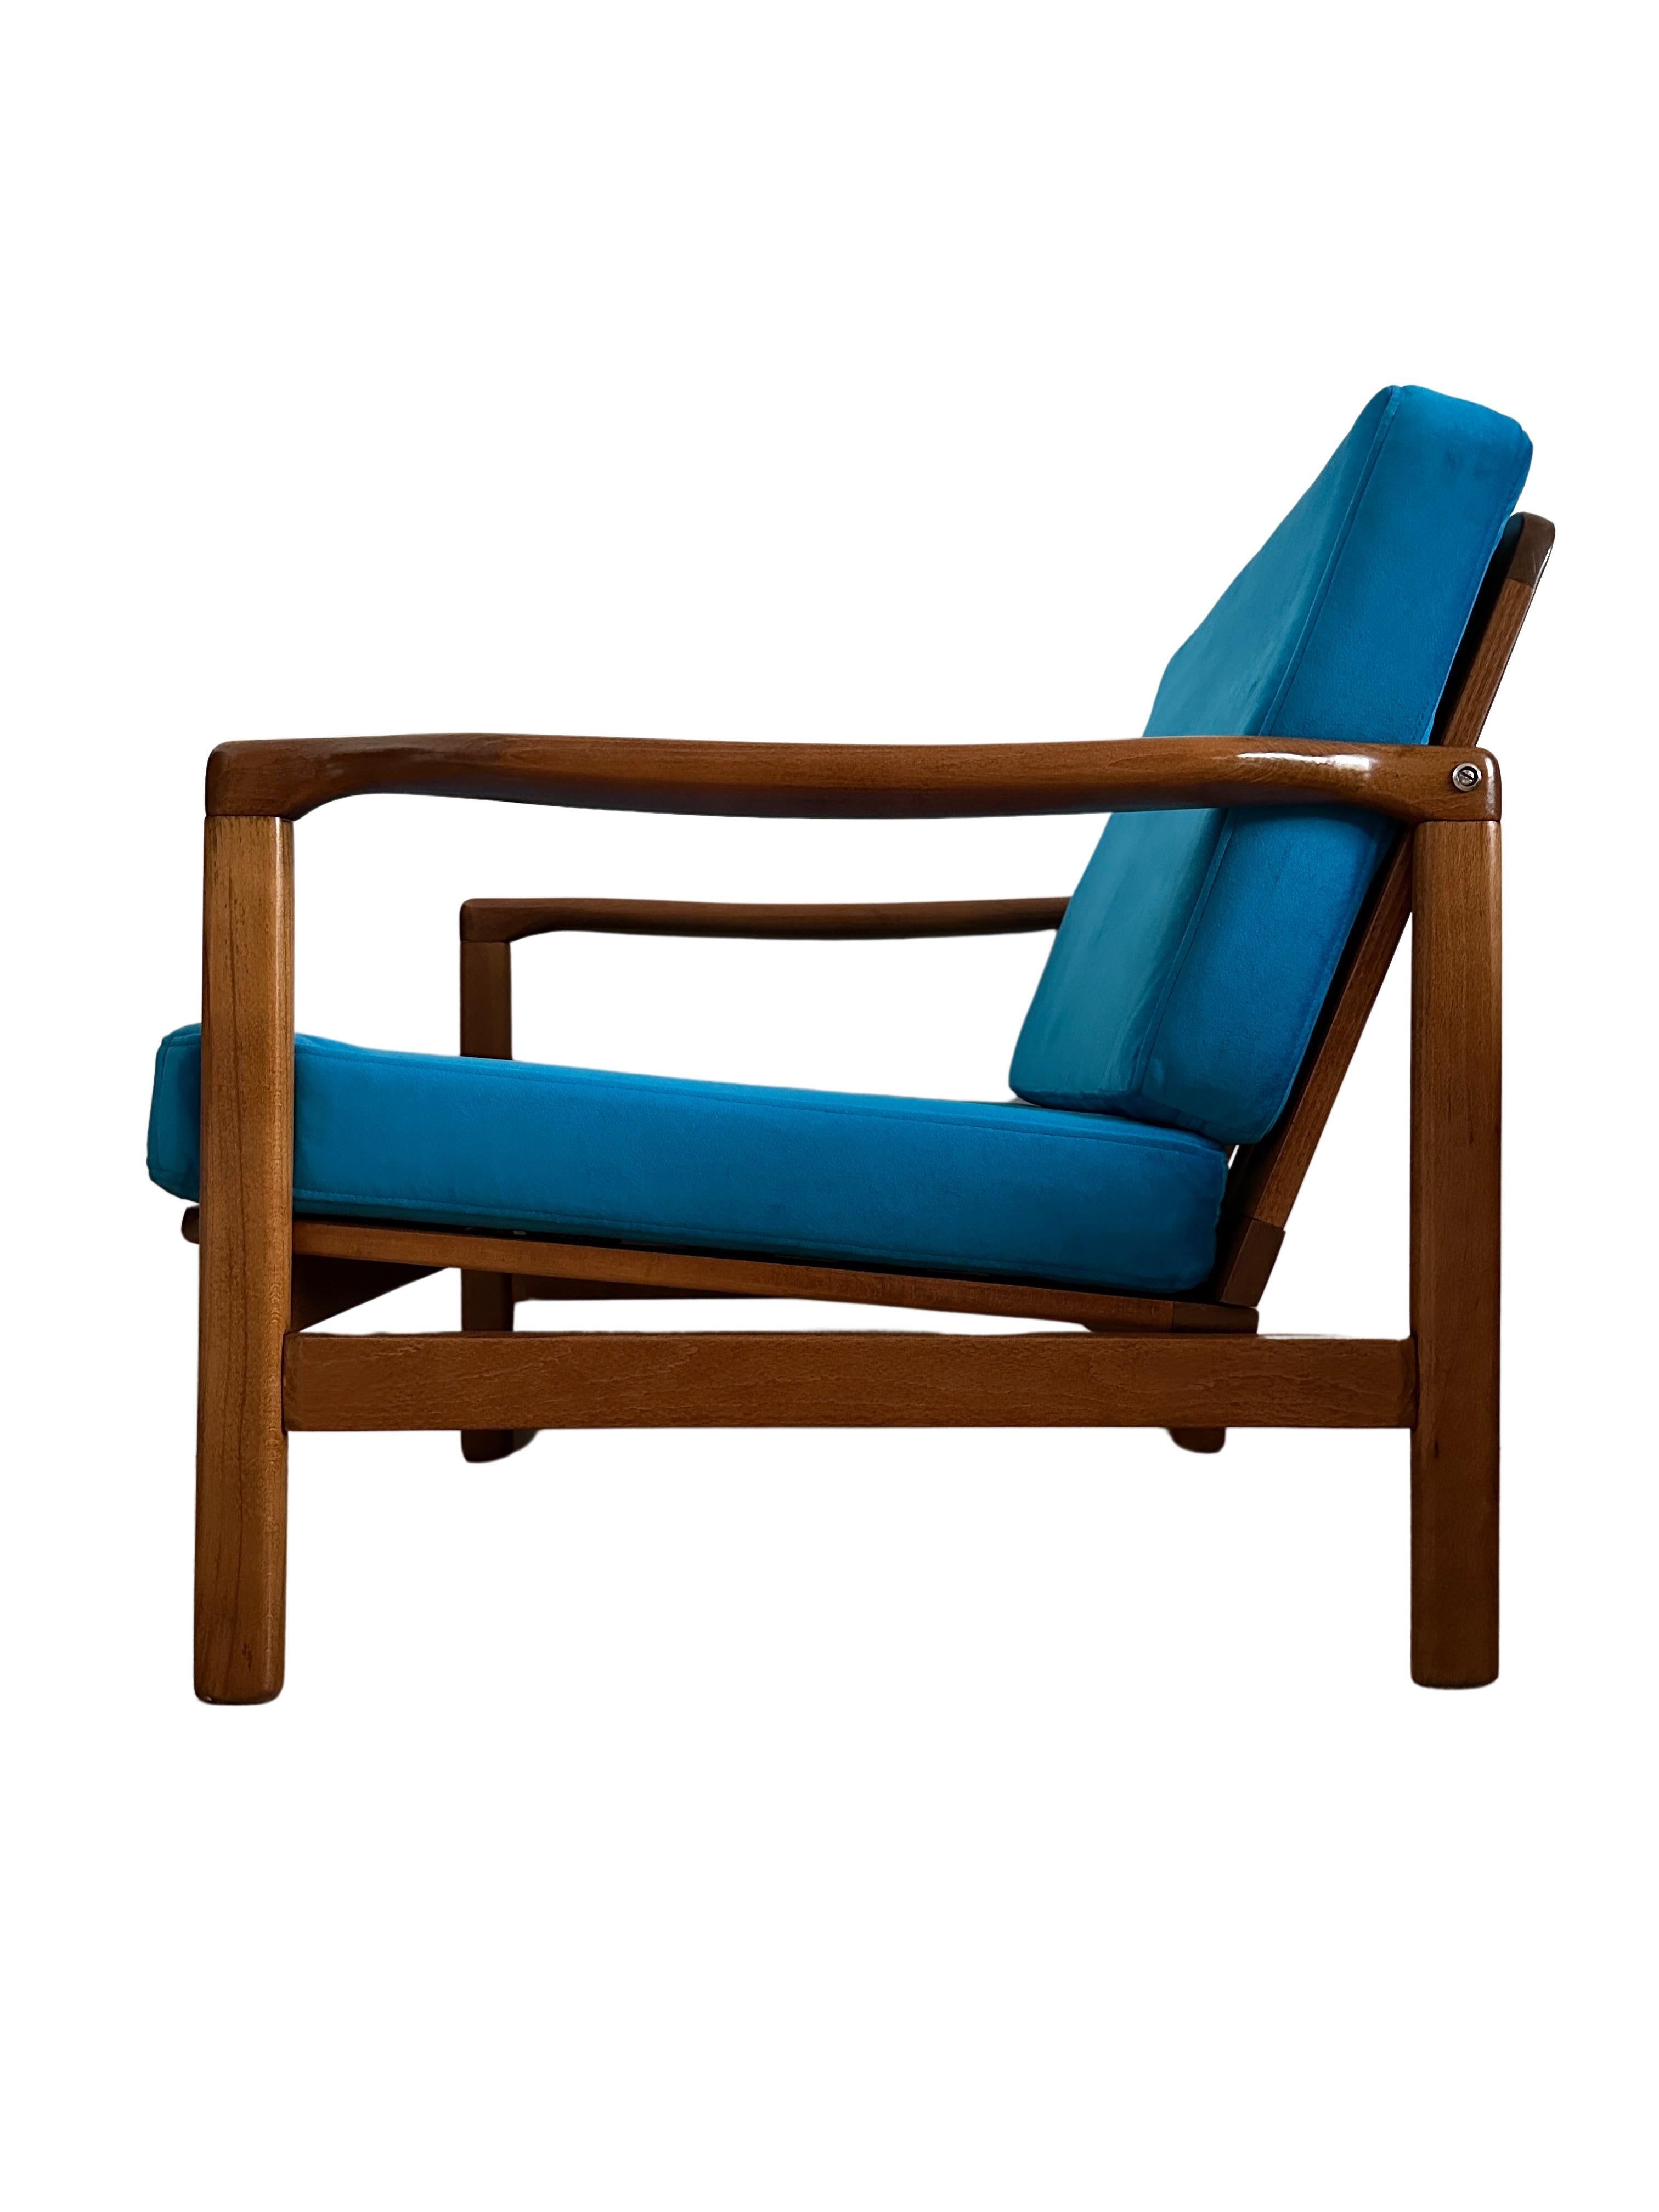 Hand-Crafted Midcentury Armchair by Zenon Baczyk, Blue Velvet Upholstery, Poland, 1960s For Sale